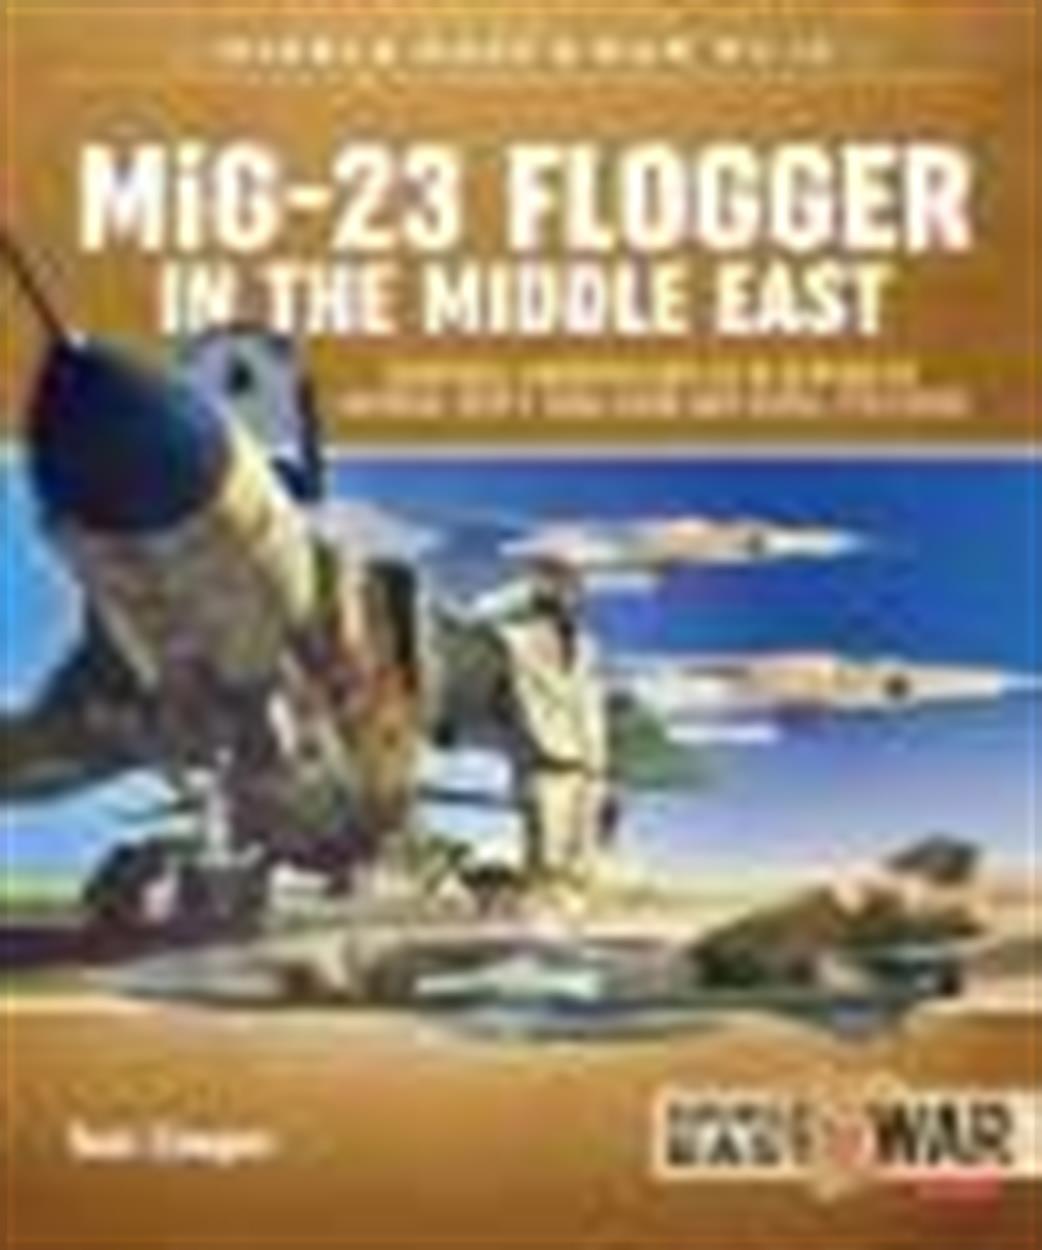 9781912390328 Mig-23 Flogger in the Middle East